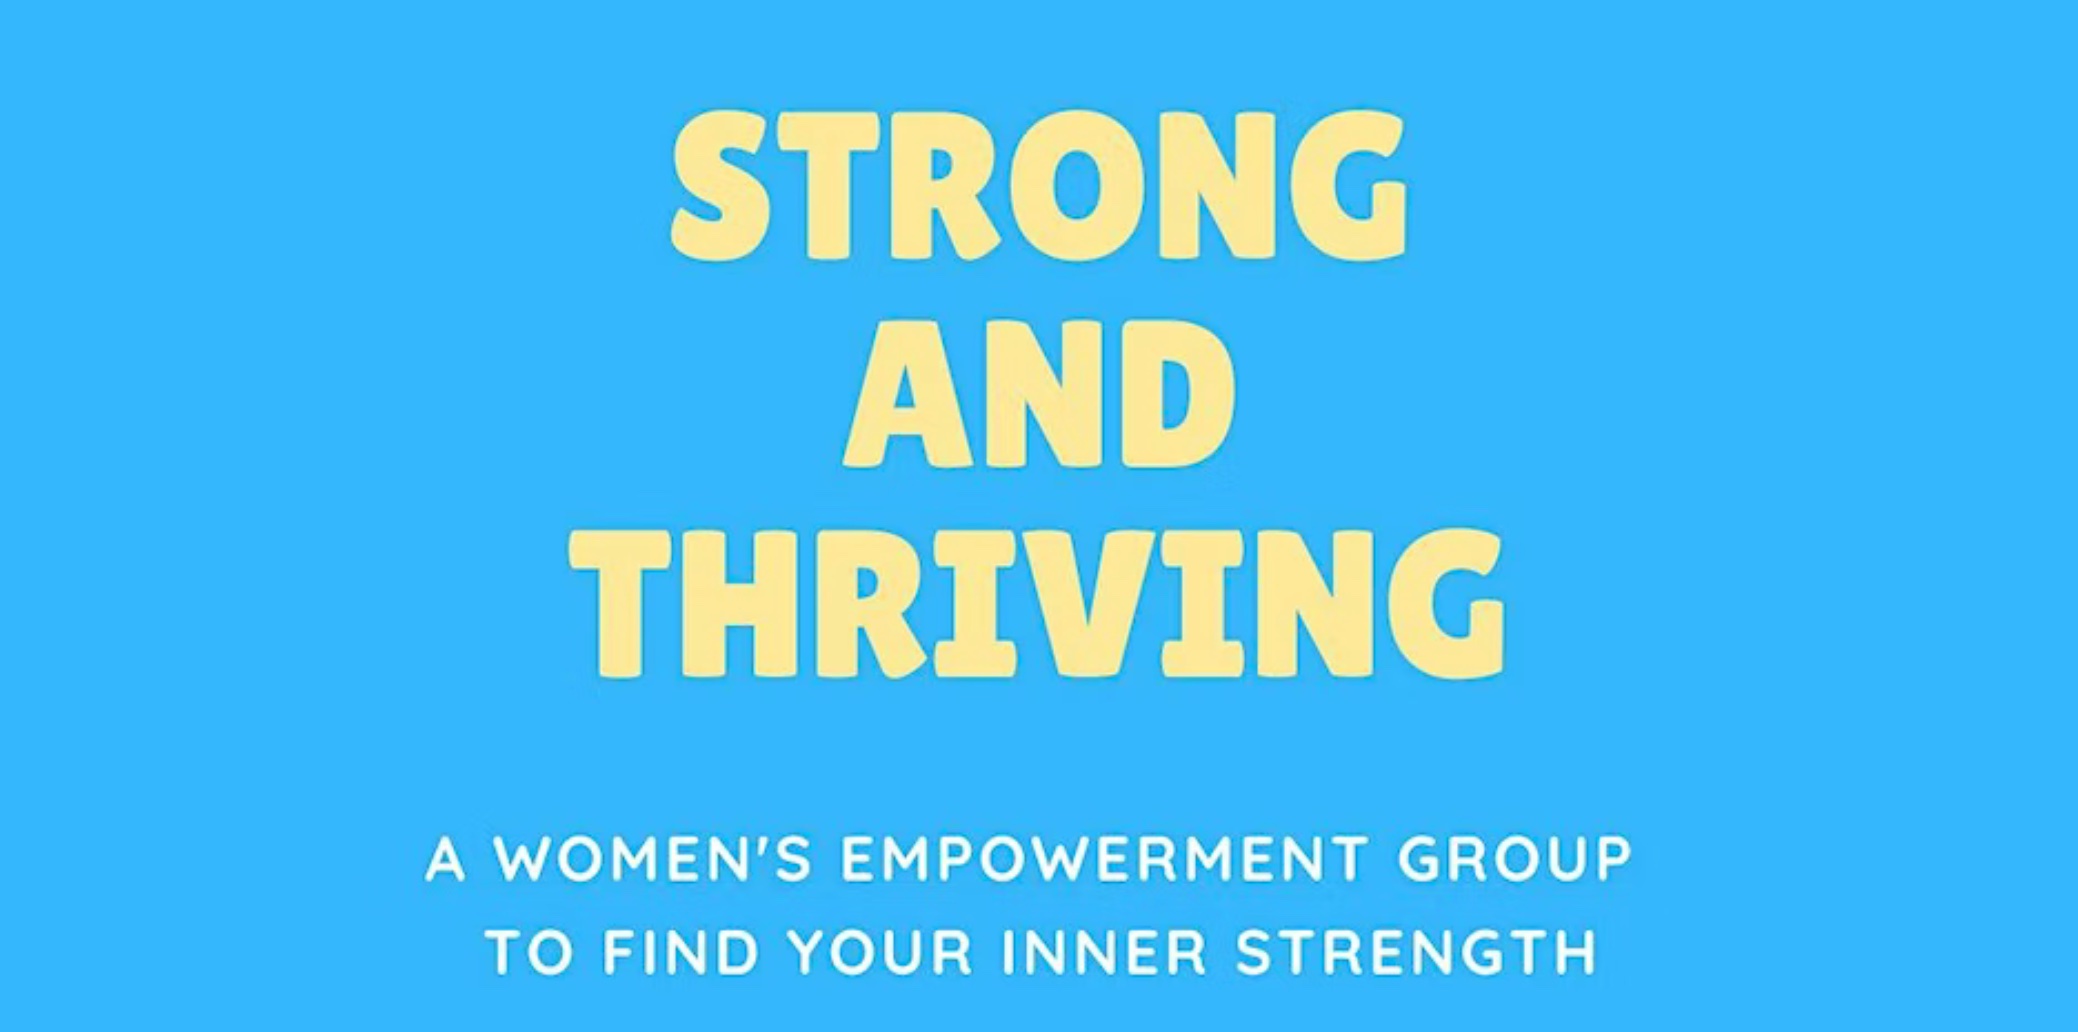 Strong and Thriving - A Women's Empowerment Group, Positive Behavioral Solutions